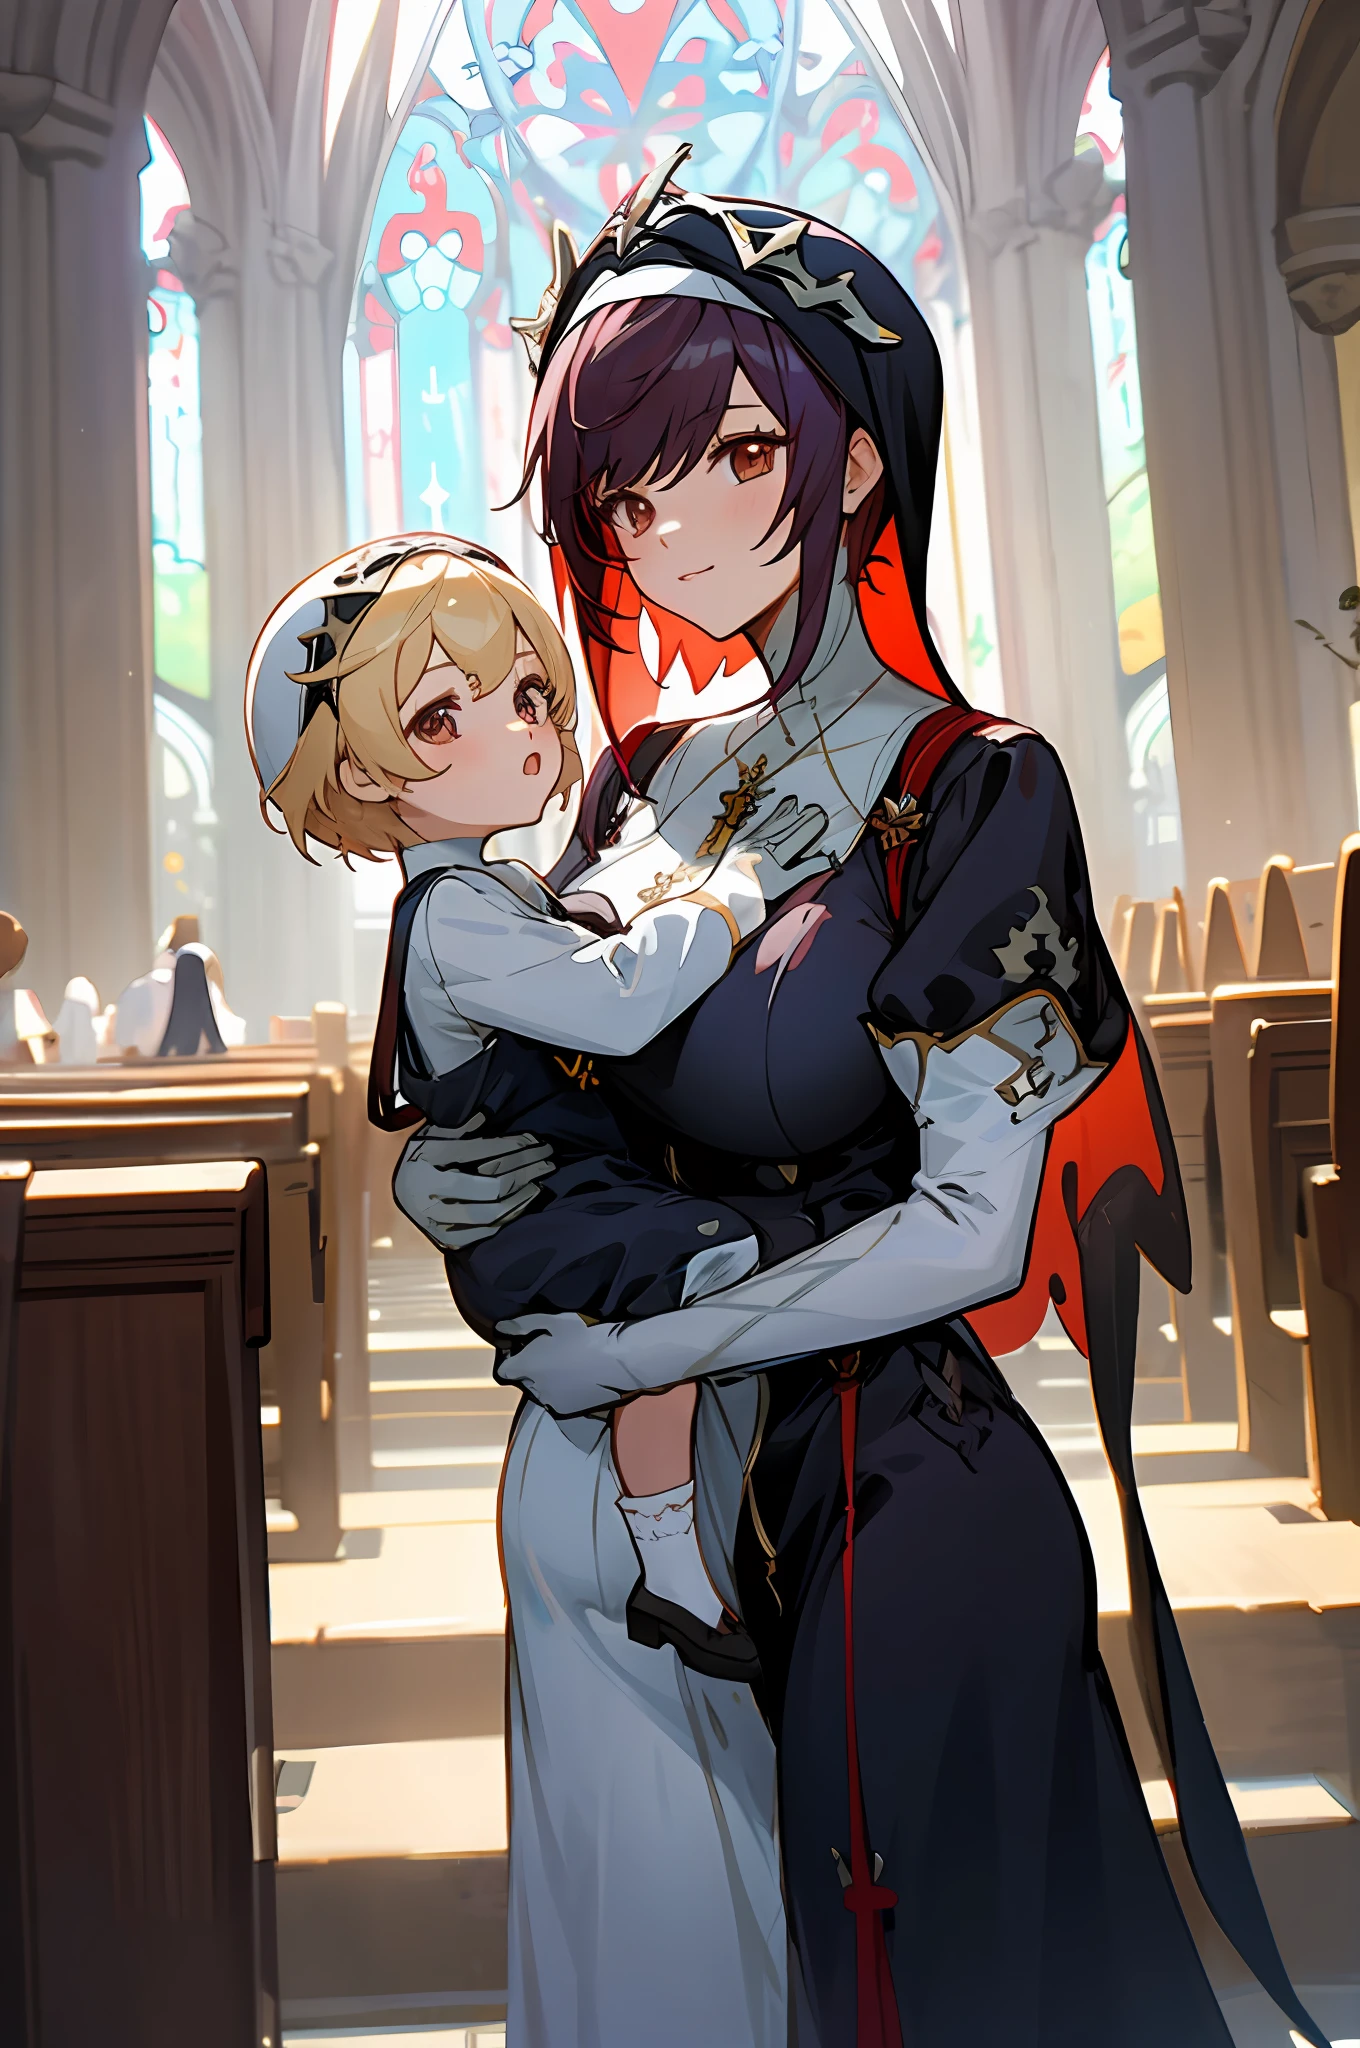 anime image of two women dressed nun posing for a picture like Nun clothing in summer, short hair, a girl in church, anime fantasy illustration, from the azur lane videogame, genshin, nun dress detailed art, two beautiful anime girls, mother and child, symbol of maternal love, happy, mother and child, such as photos of mother and 